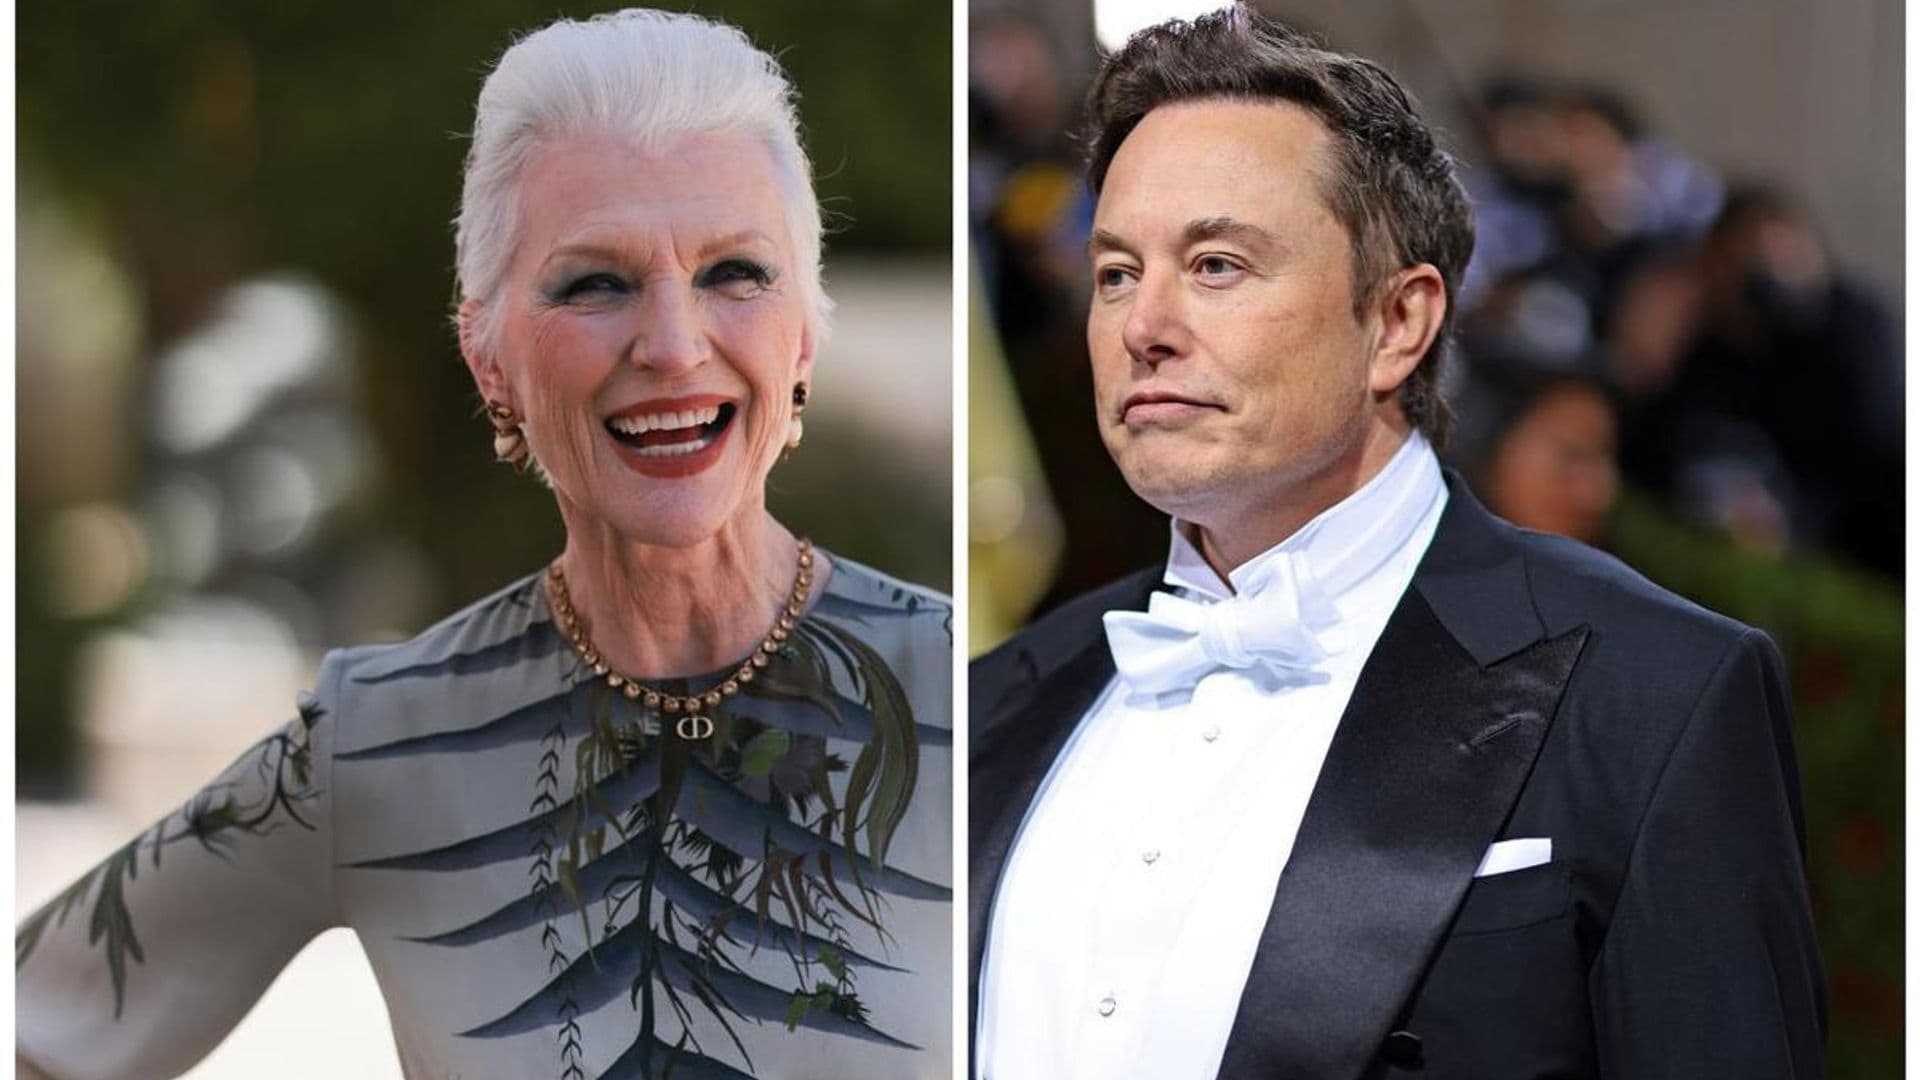 Elon Musk’s mom Maye Musk seemingly talks about his parenting role after controversial tweet